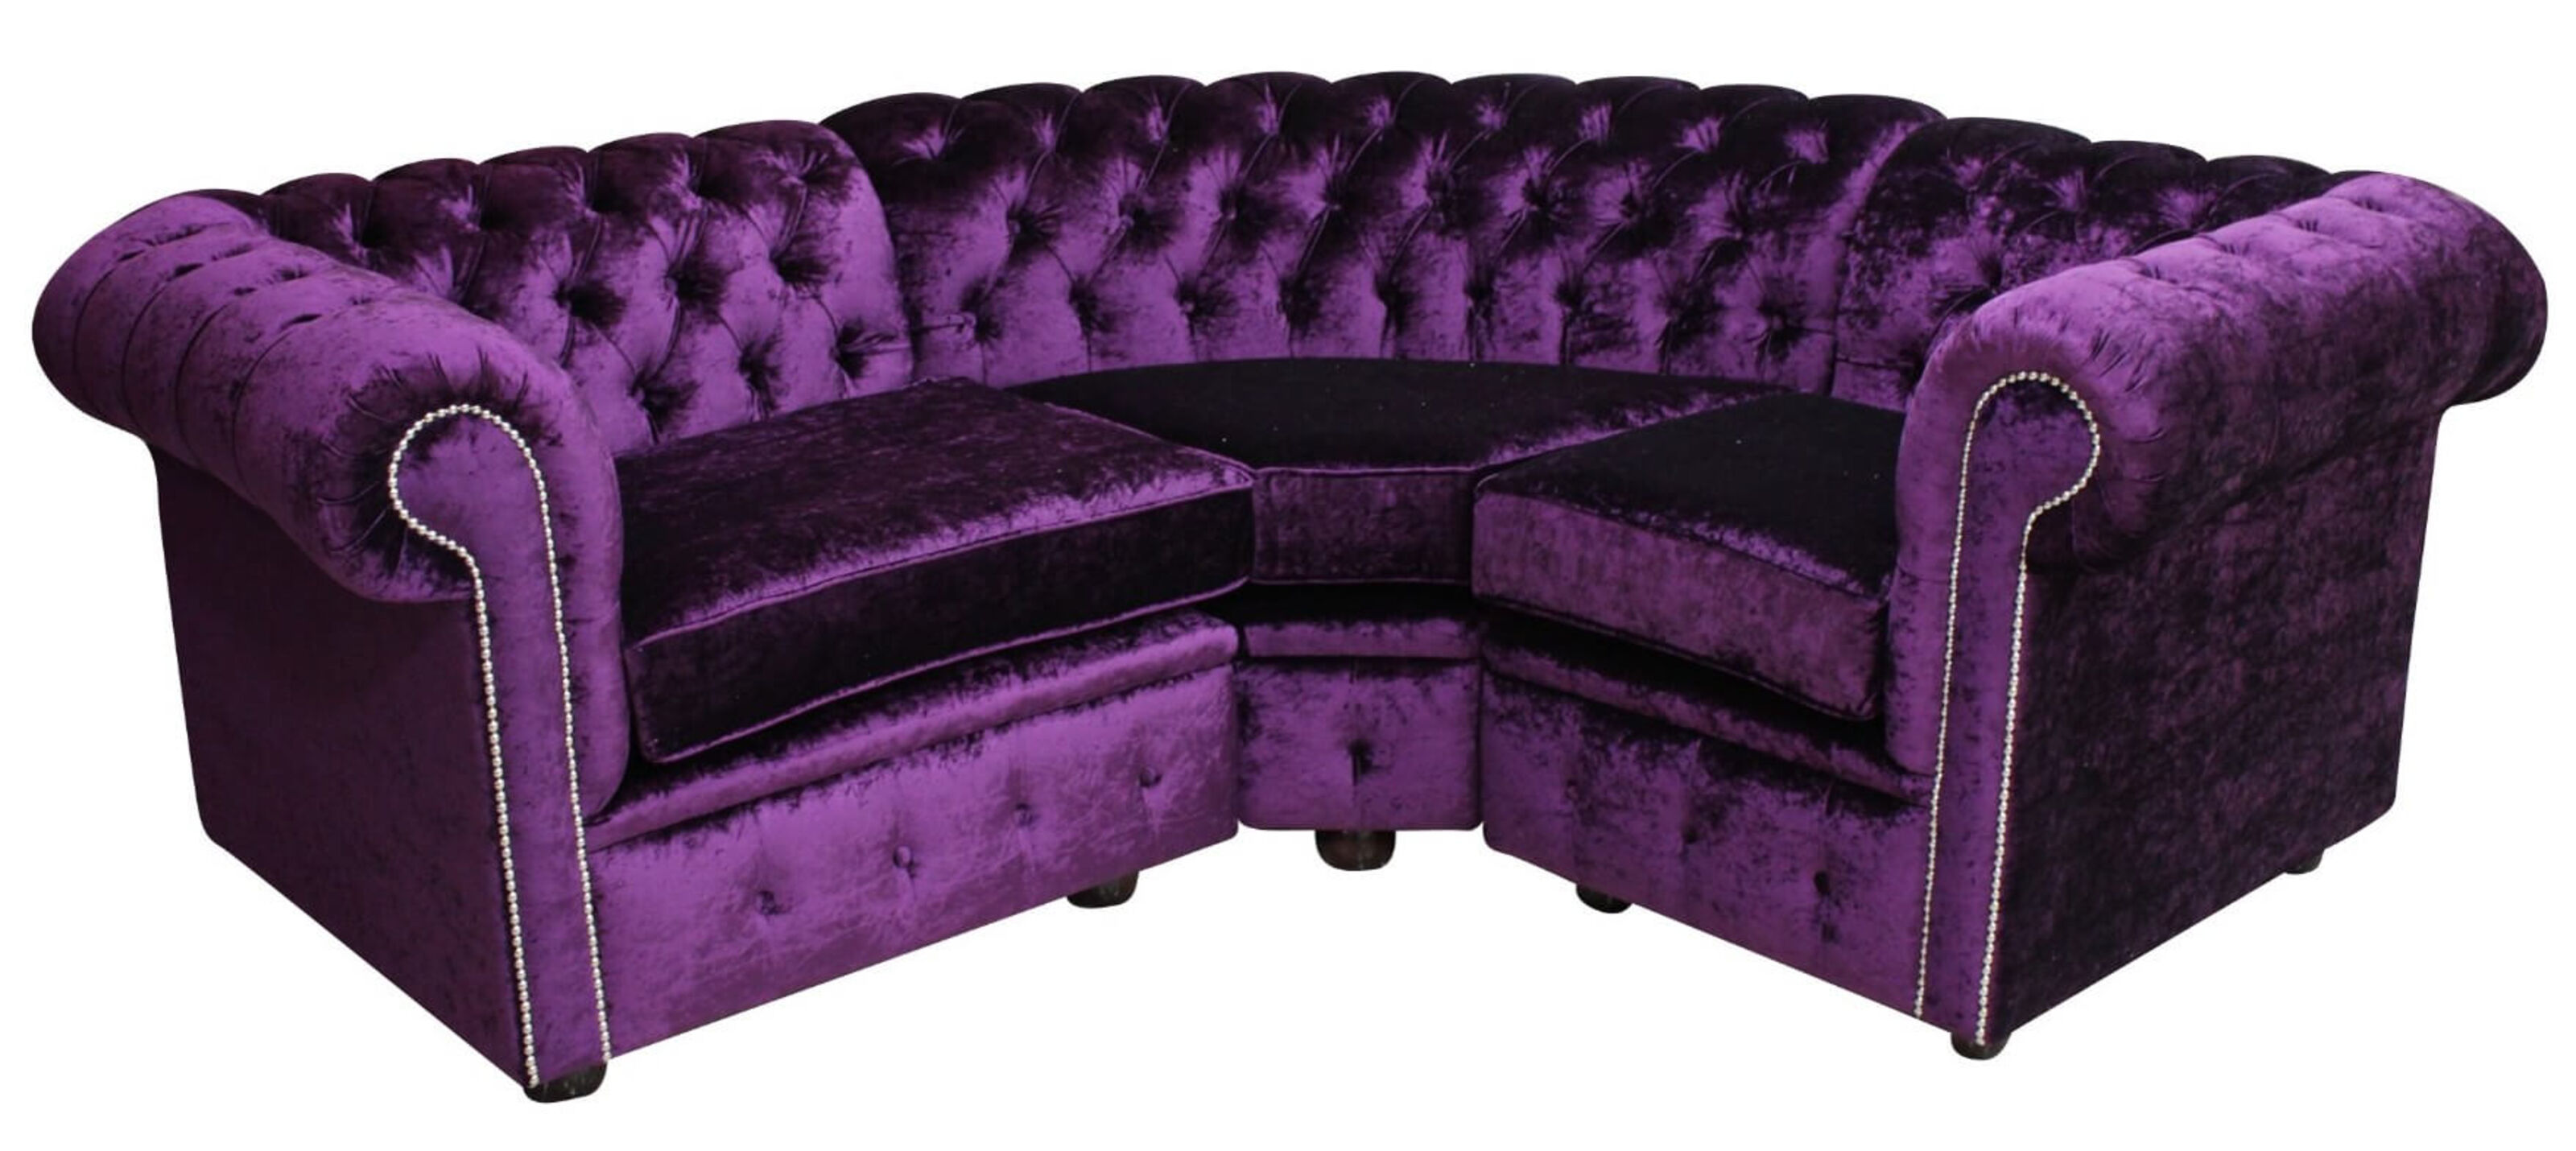 Johannesburg's Distinguished Seating Chesterfield Couches Available for Sale  %Post Title